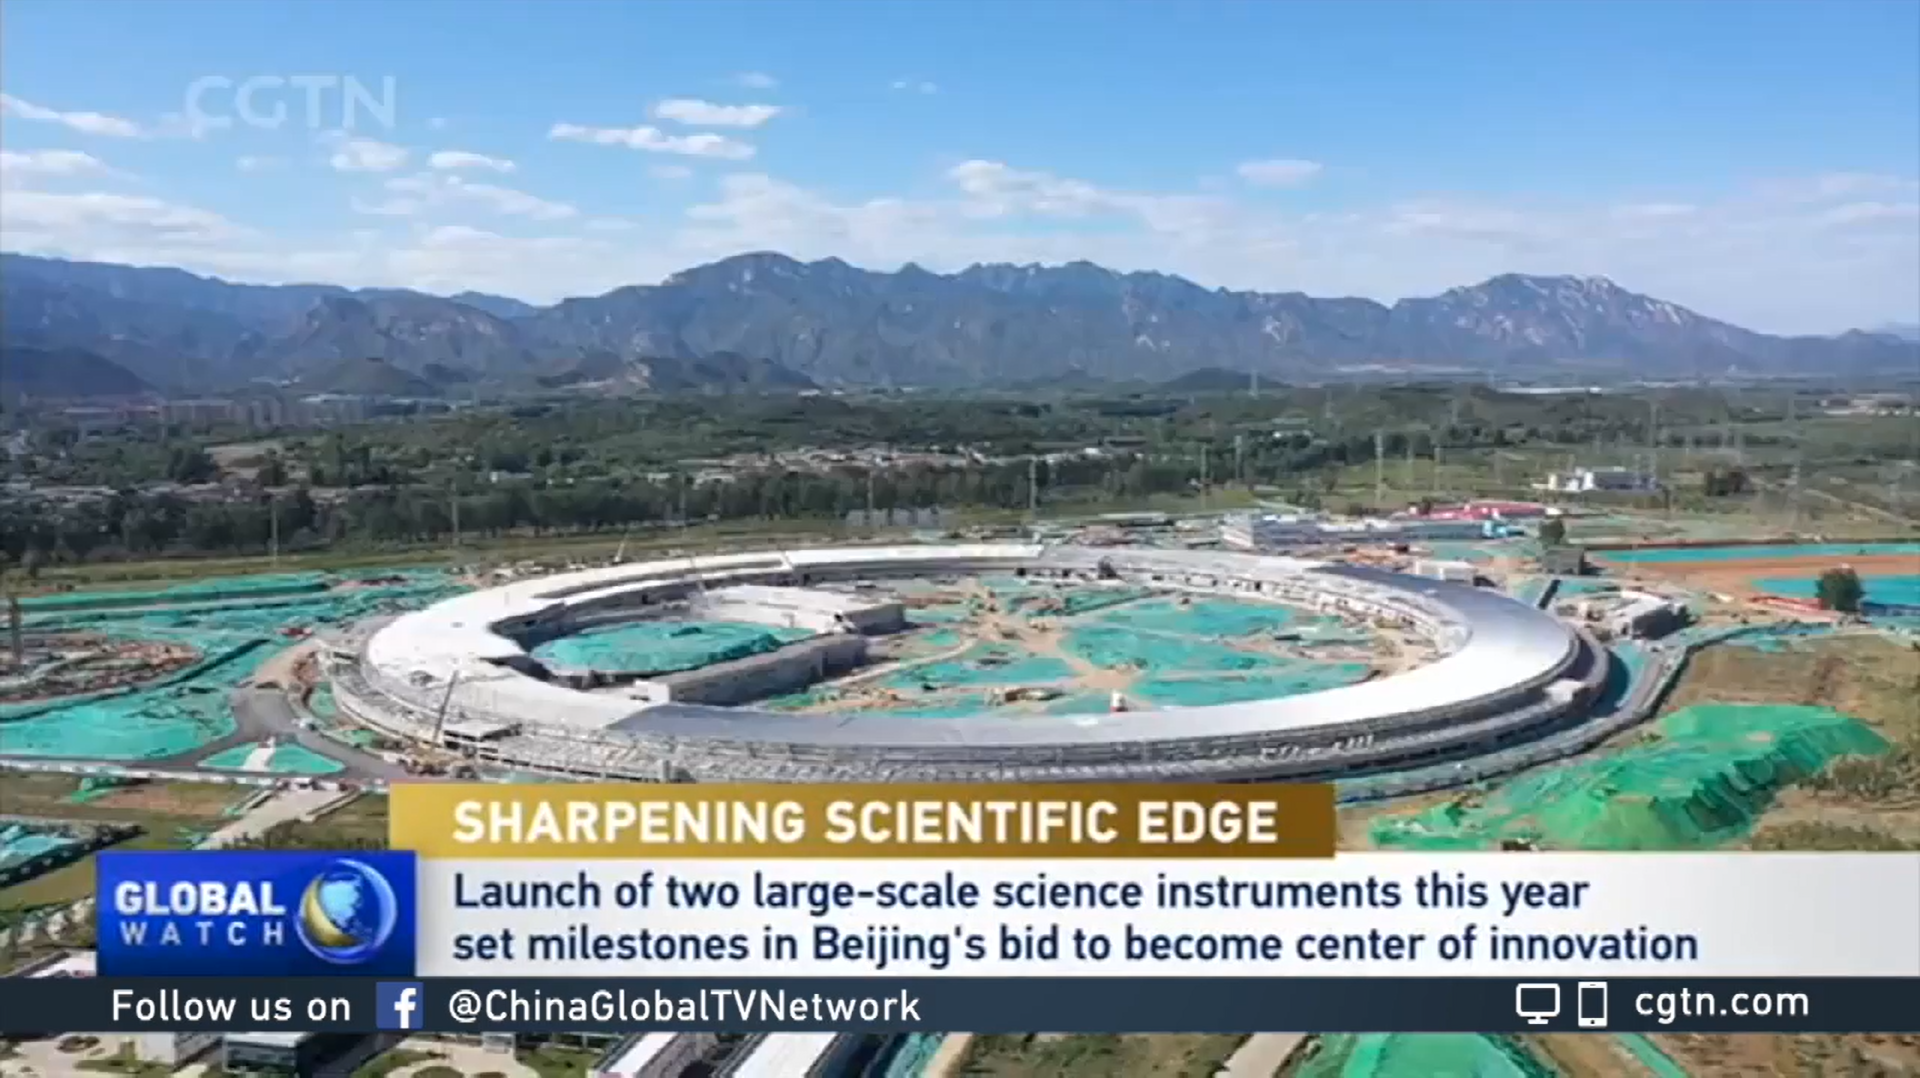 Two Large-scale Science Instruments to be Launched in Beijing's Huairou